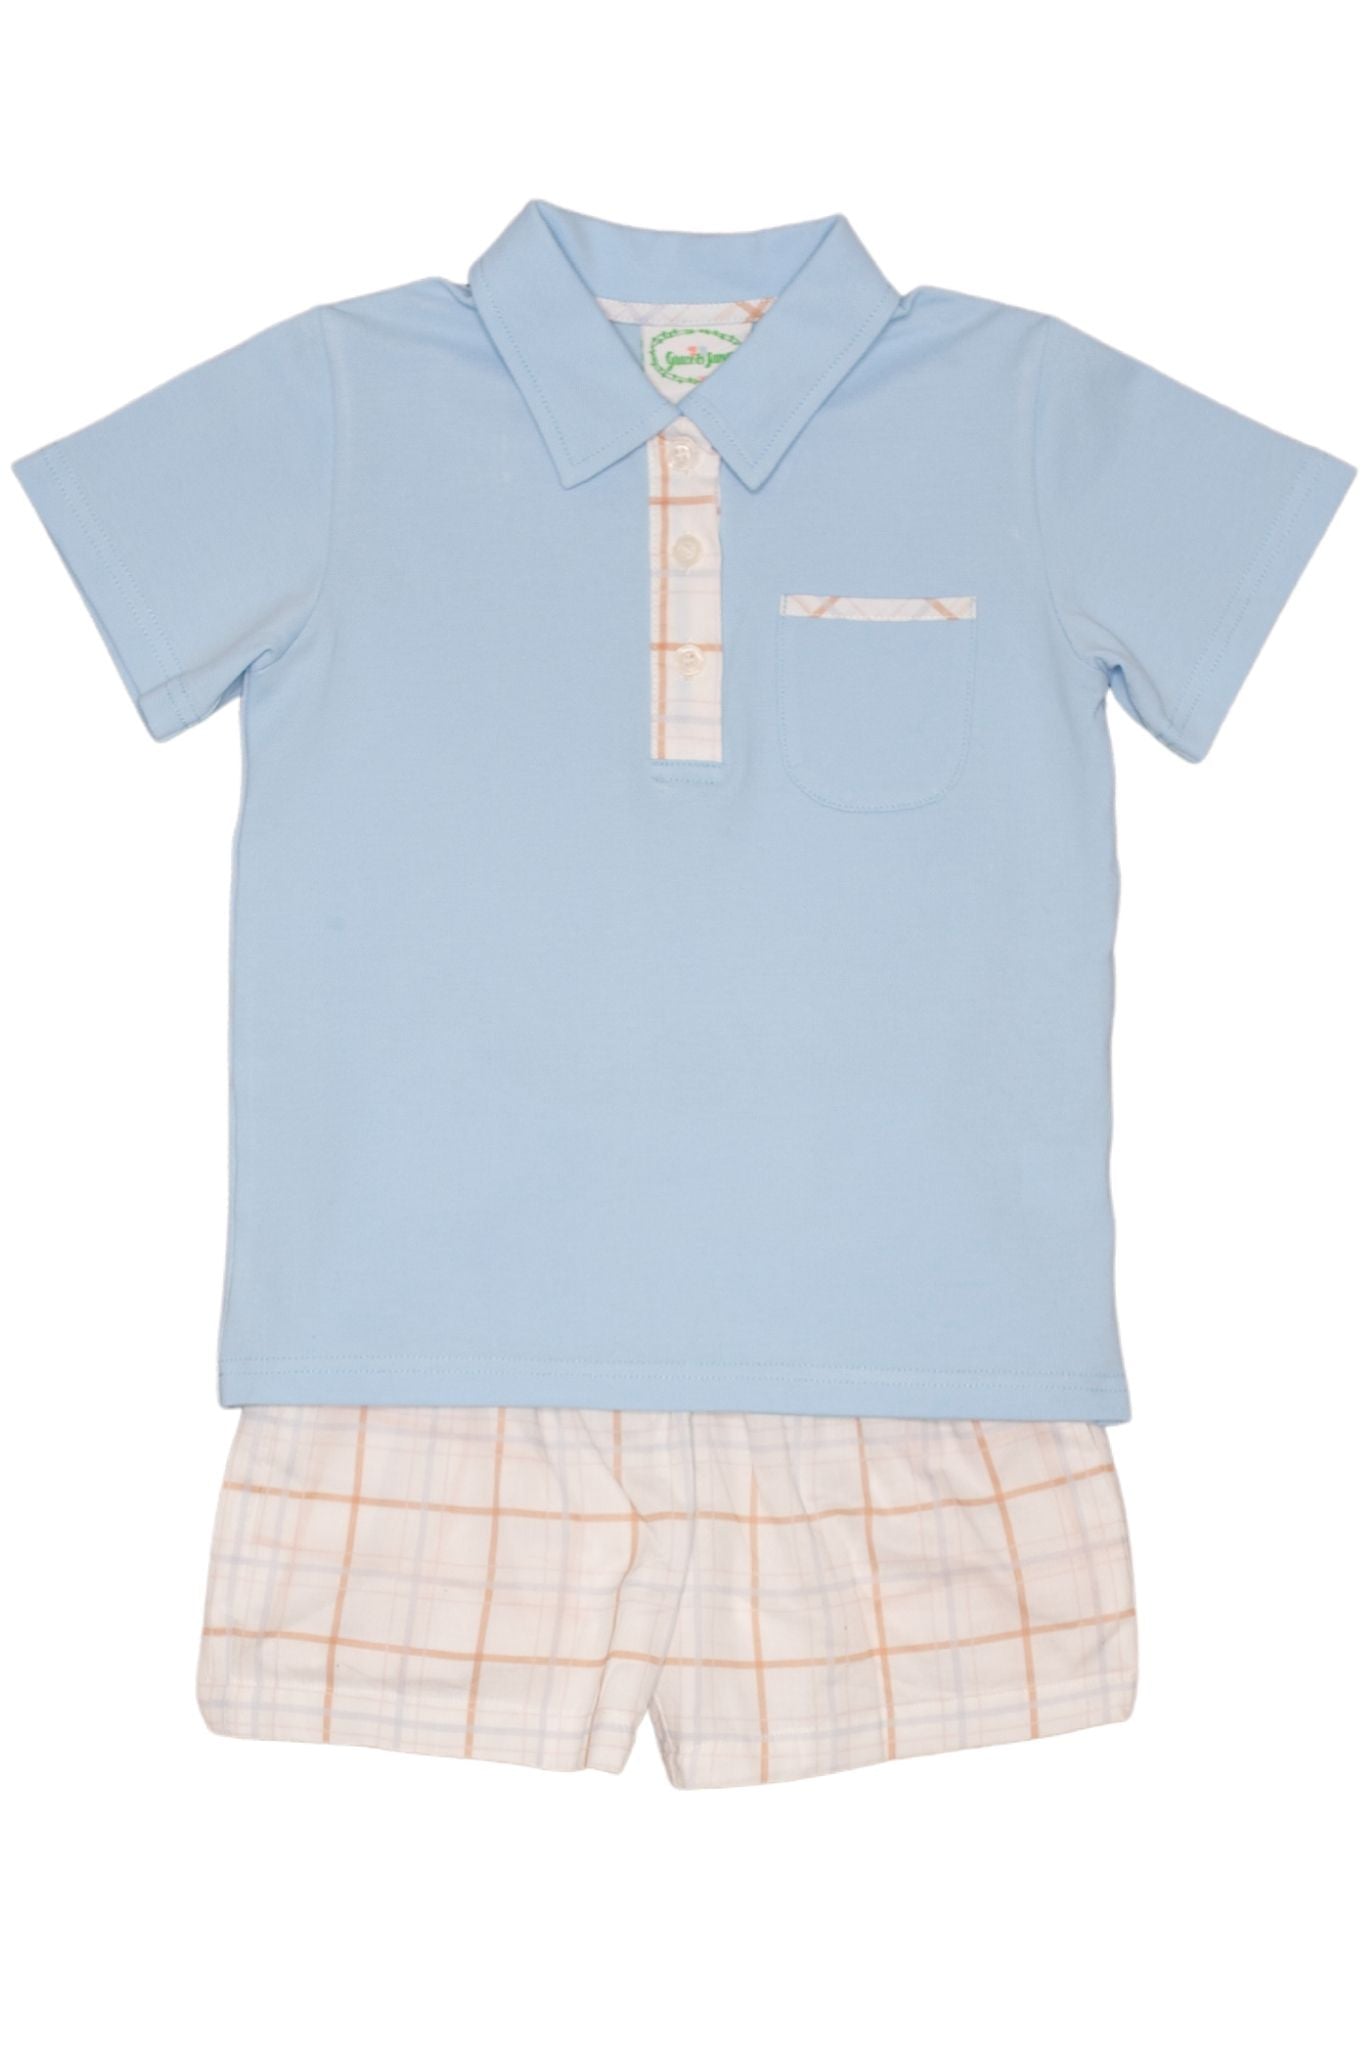 Chandler Collared Shirt Set with Light Blue Collared Shirt and Plaid Shorts